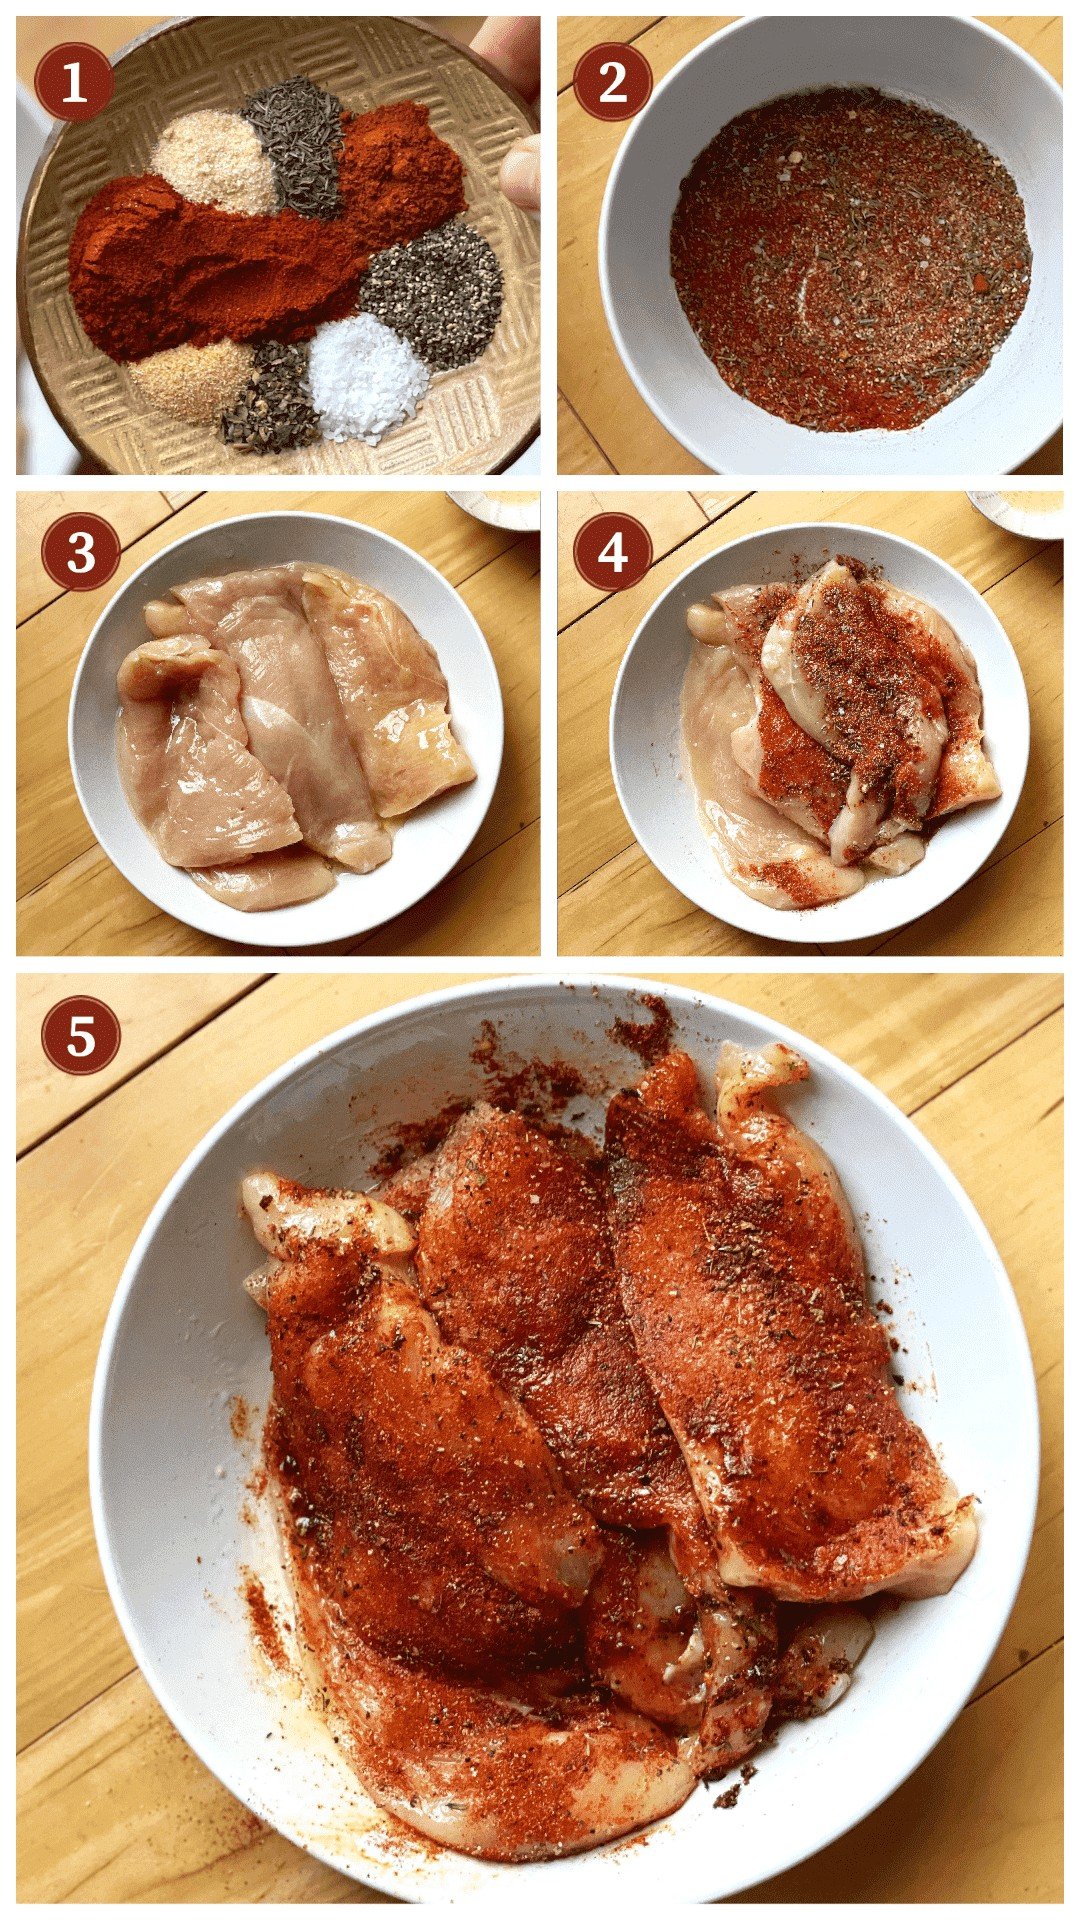 A collage of images showing how to make blackened chicken, steps 1 - 5.